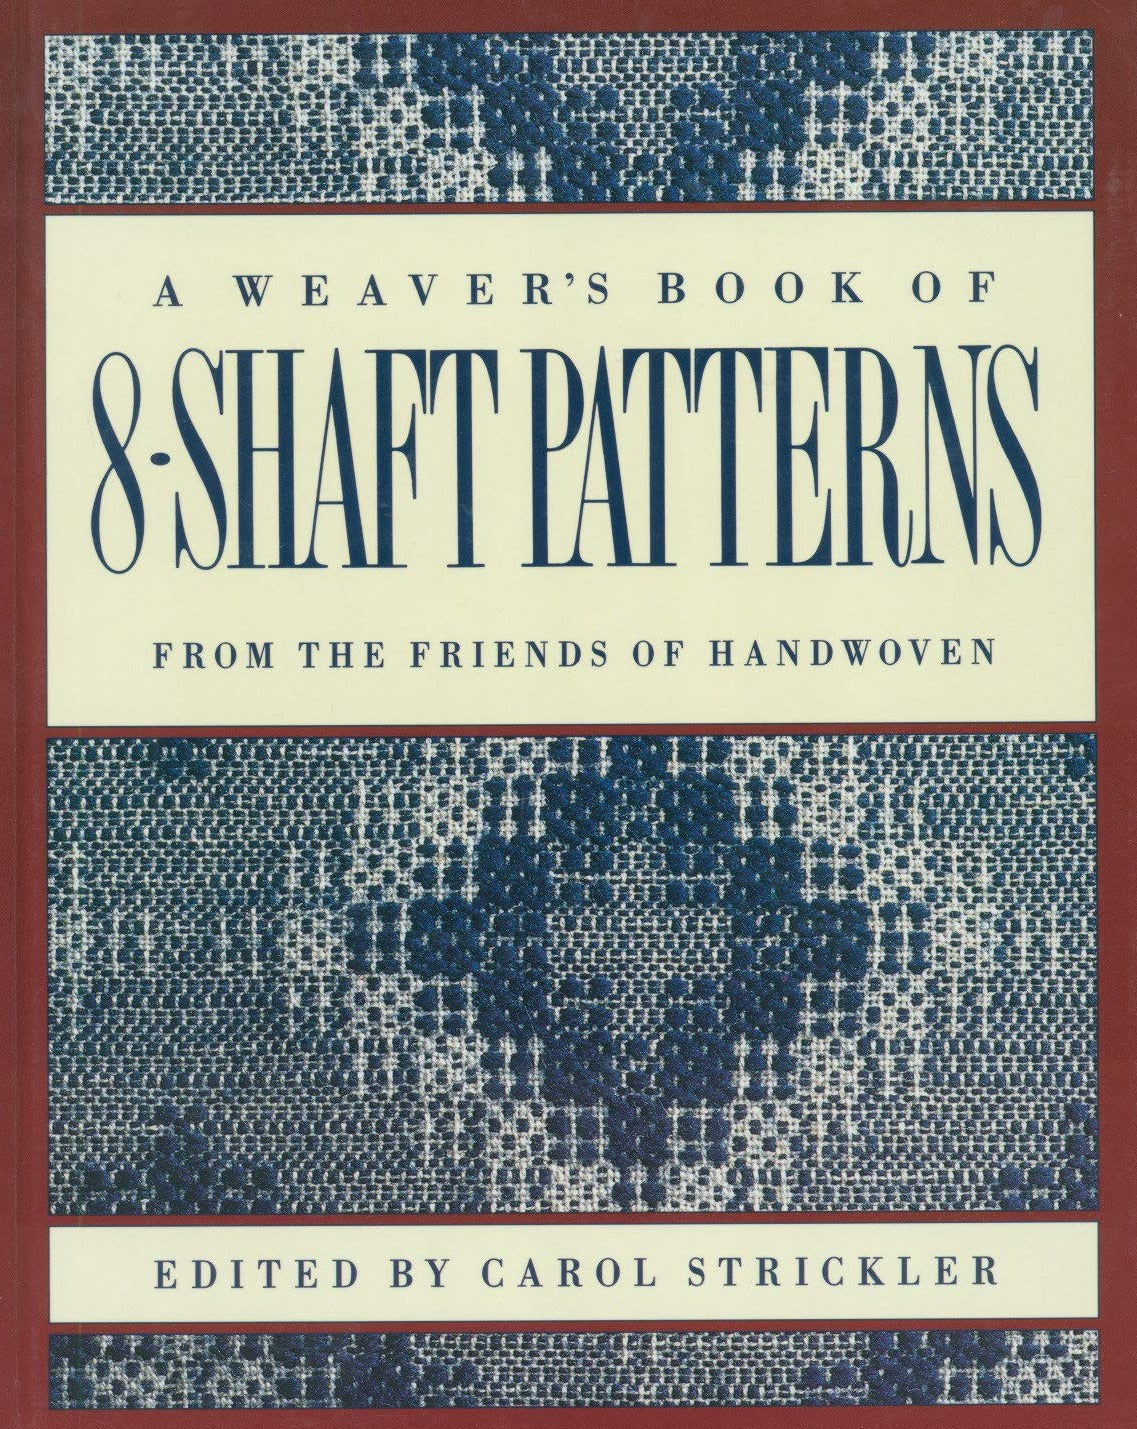 A Weaver's Book of 8 - Shaft Patterns From Friends of Handwoven